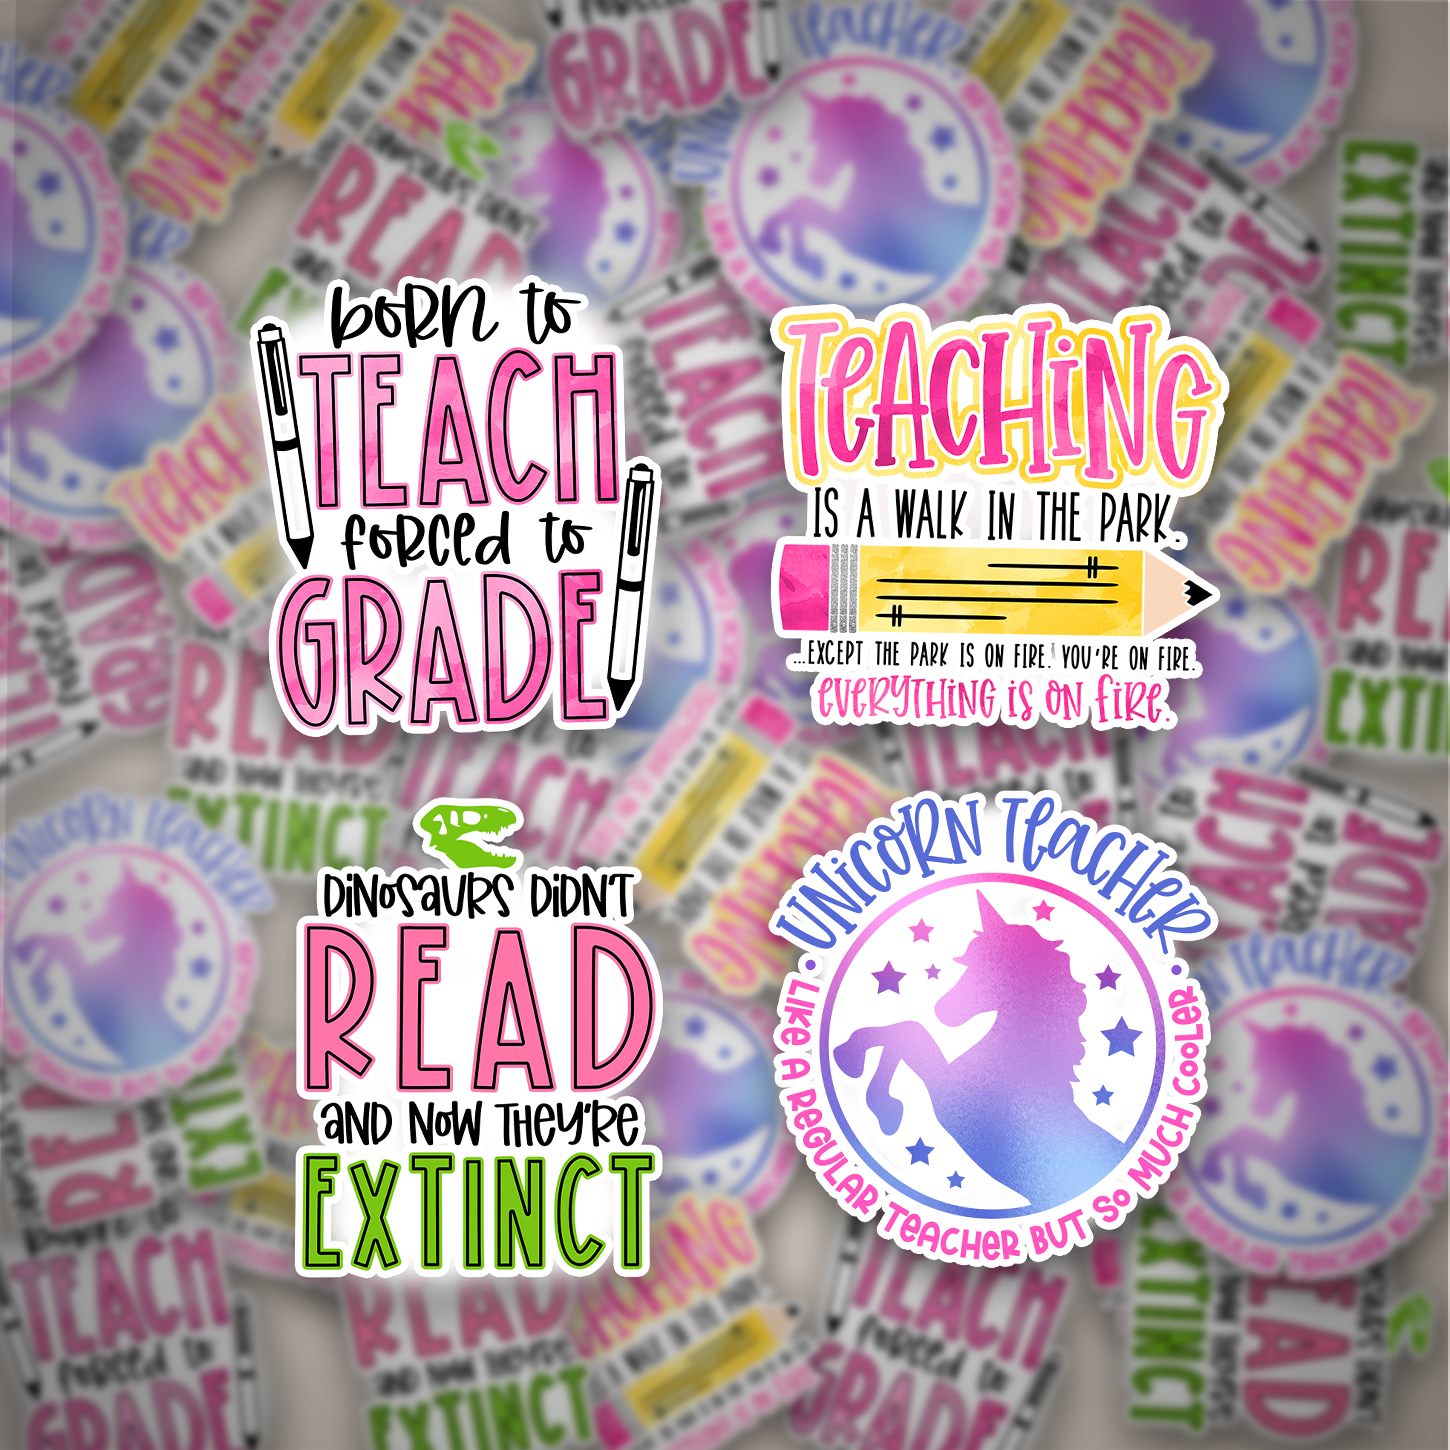 Funny Teacher Occupation Stickers, 4 Pack, Permanent Vinyl Decals ($1.50 each)